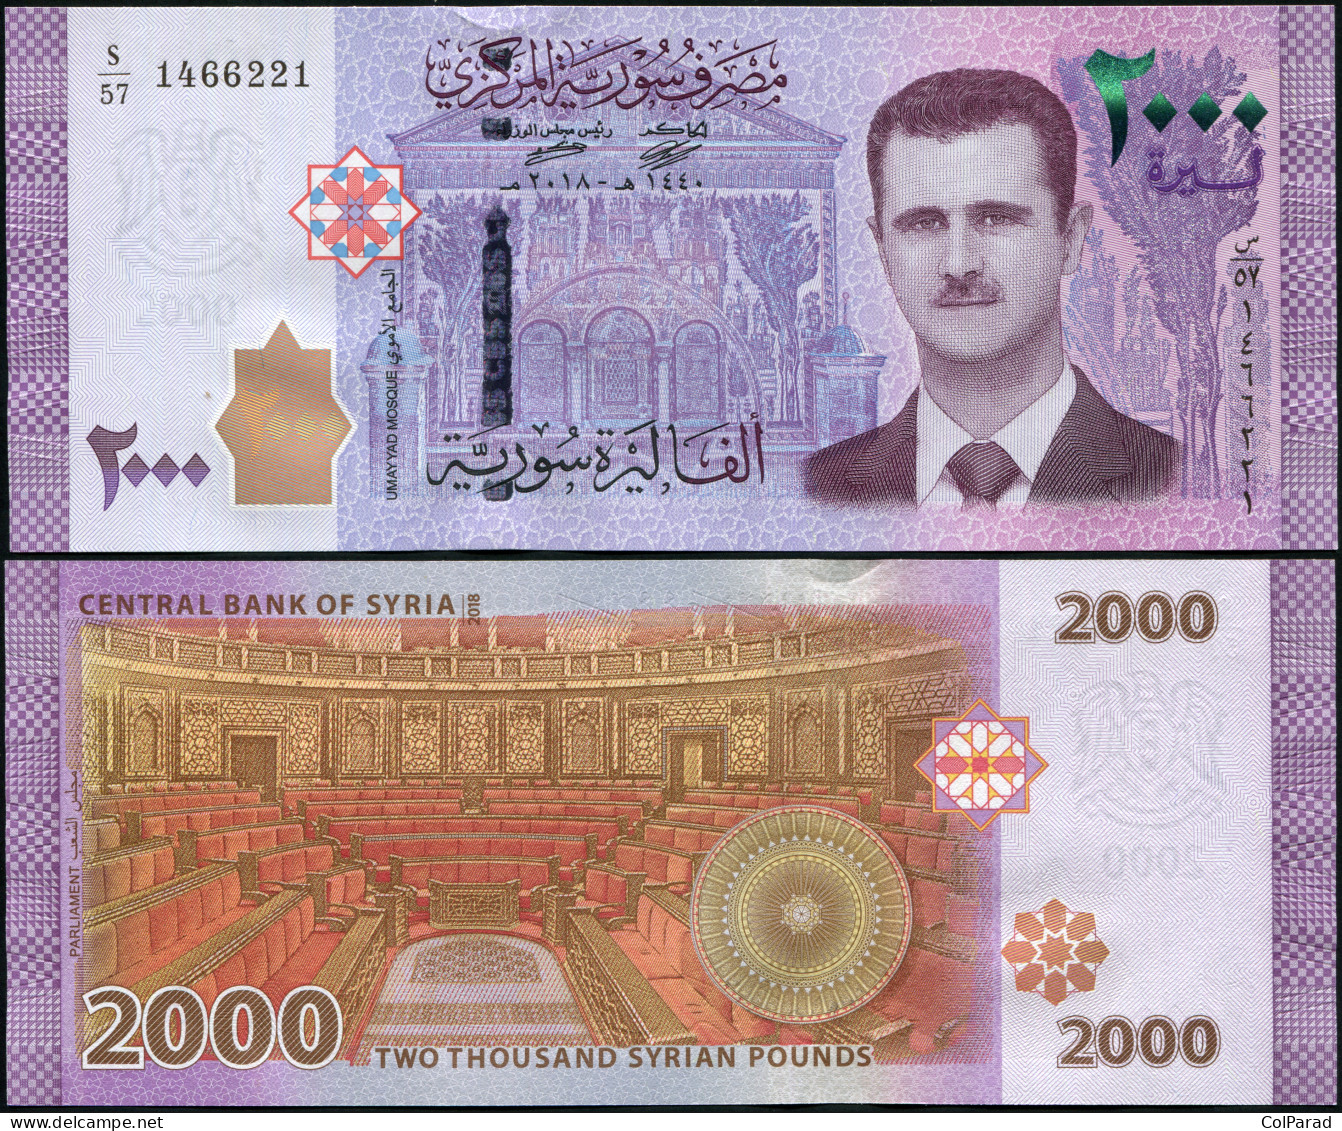 SYRIA 2000 SYRIAN POUNDS - 2018 - Paper Unc - P.117c Banknote - Syria